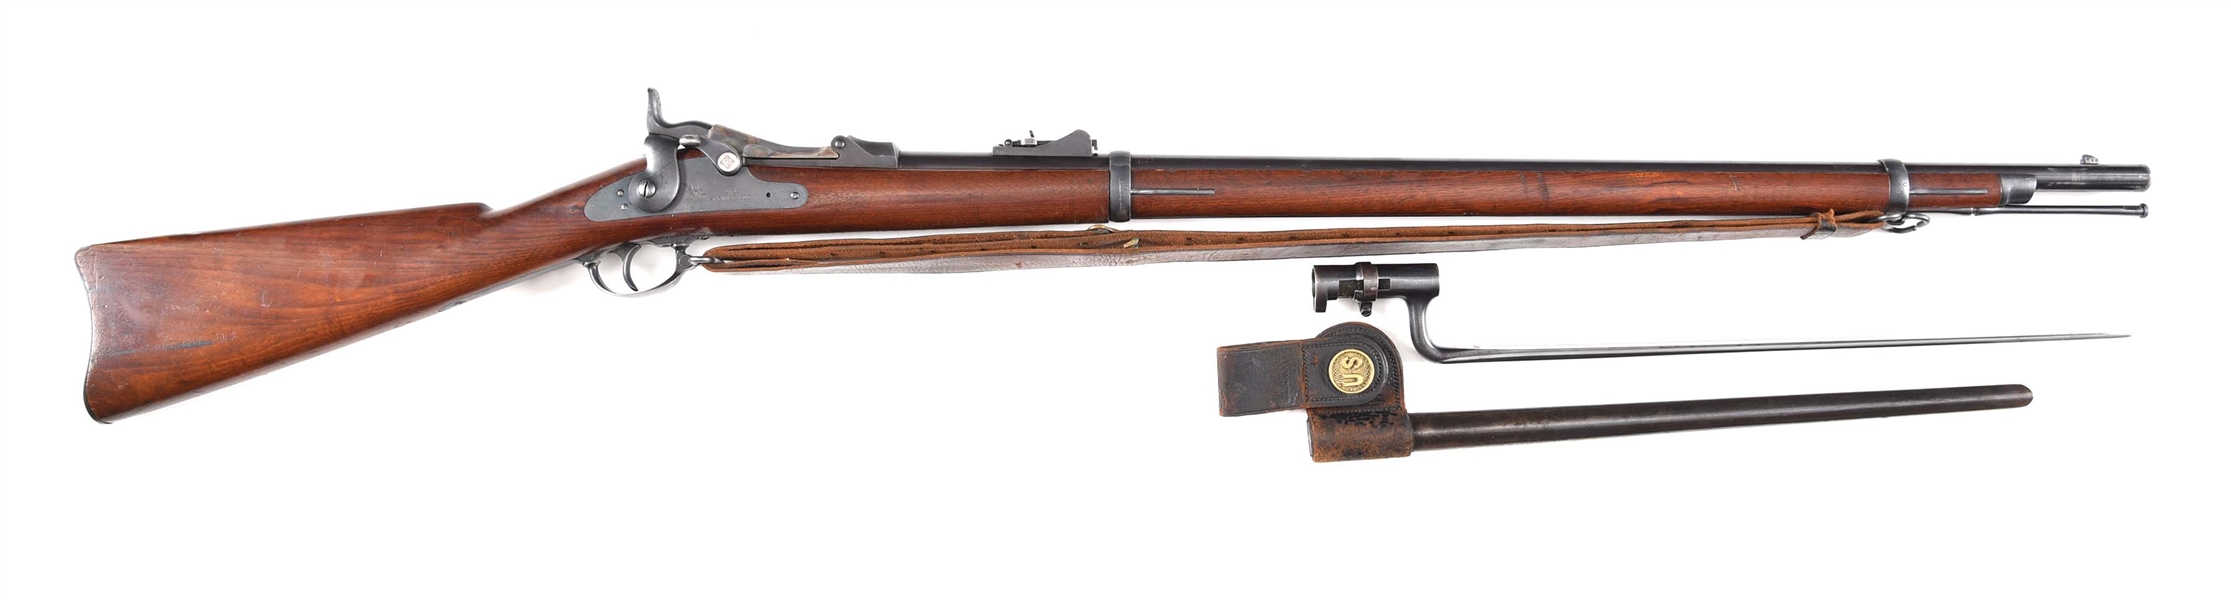 (A) SPRINGFIELD 1873 PERCUSSION RIFLE WITH BAYONET IN EXTREMELY WELL PRESERVED CONDITION.